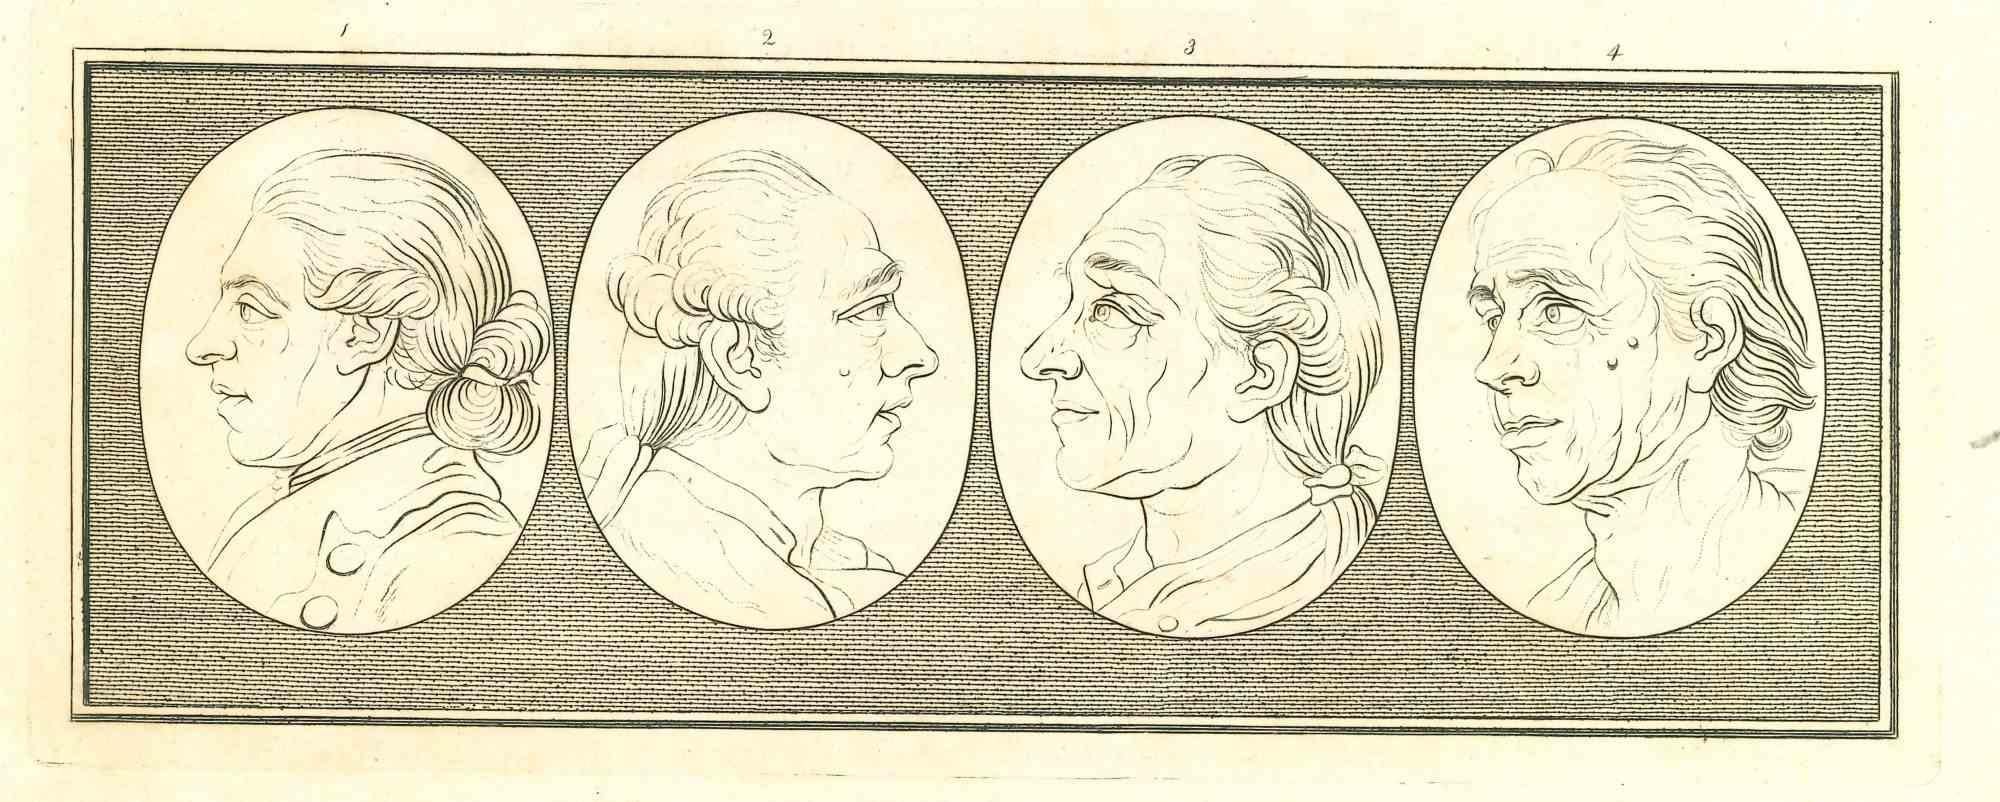 Heads of men is an original etching realized by Thomas Holloway for Johann Caspar Lavater's  "Essays on Physiognomy, Designed to promote the Knowledge and the Love of Mankind", London, Bensley, 1810. 

 This artwork portrays heads of men. On the